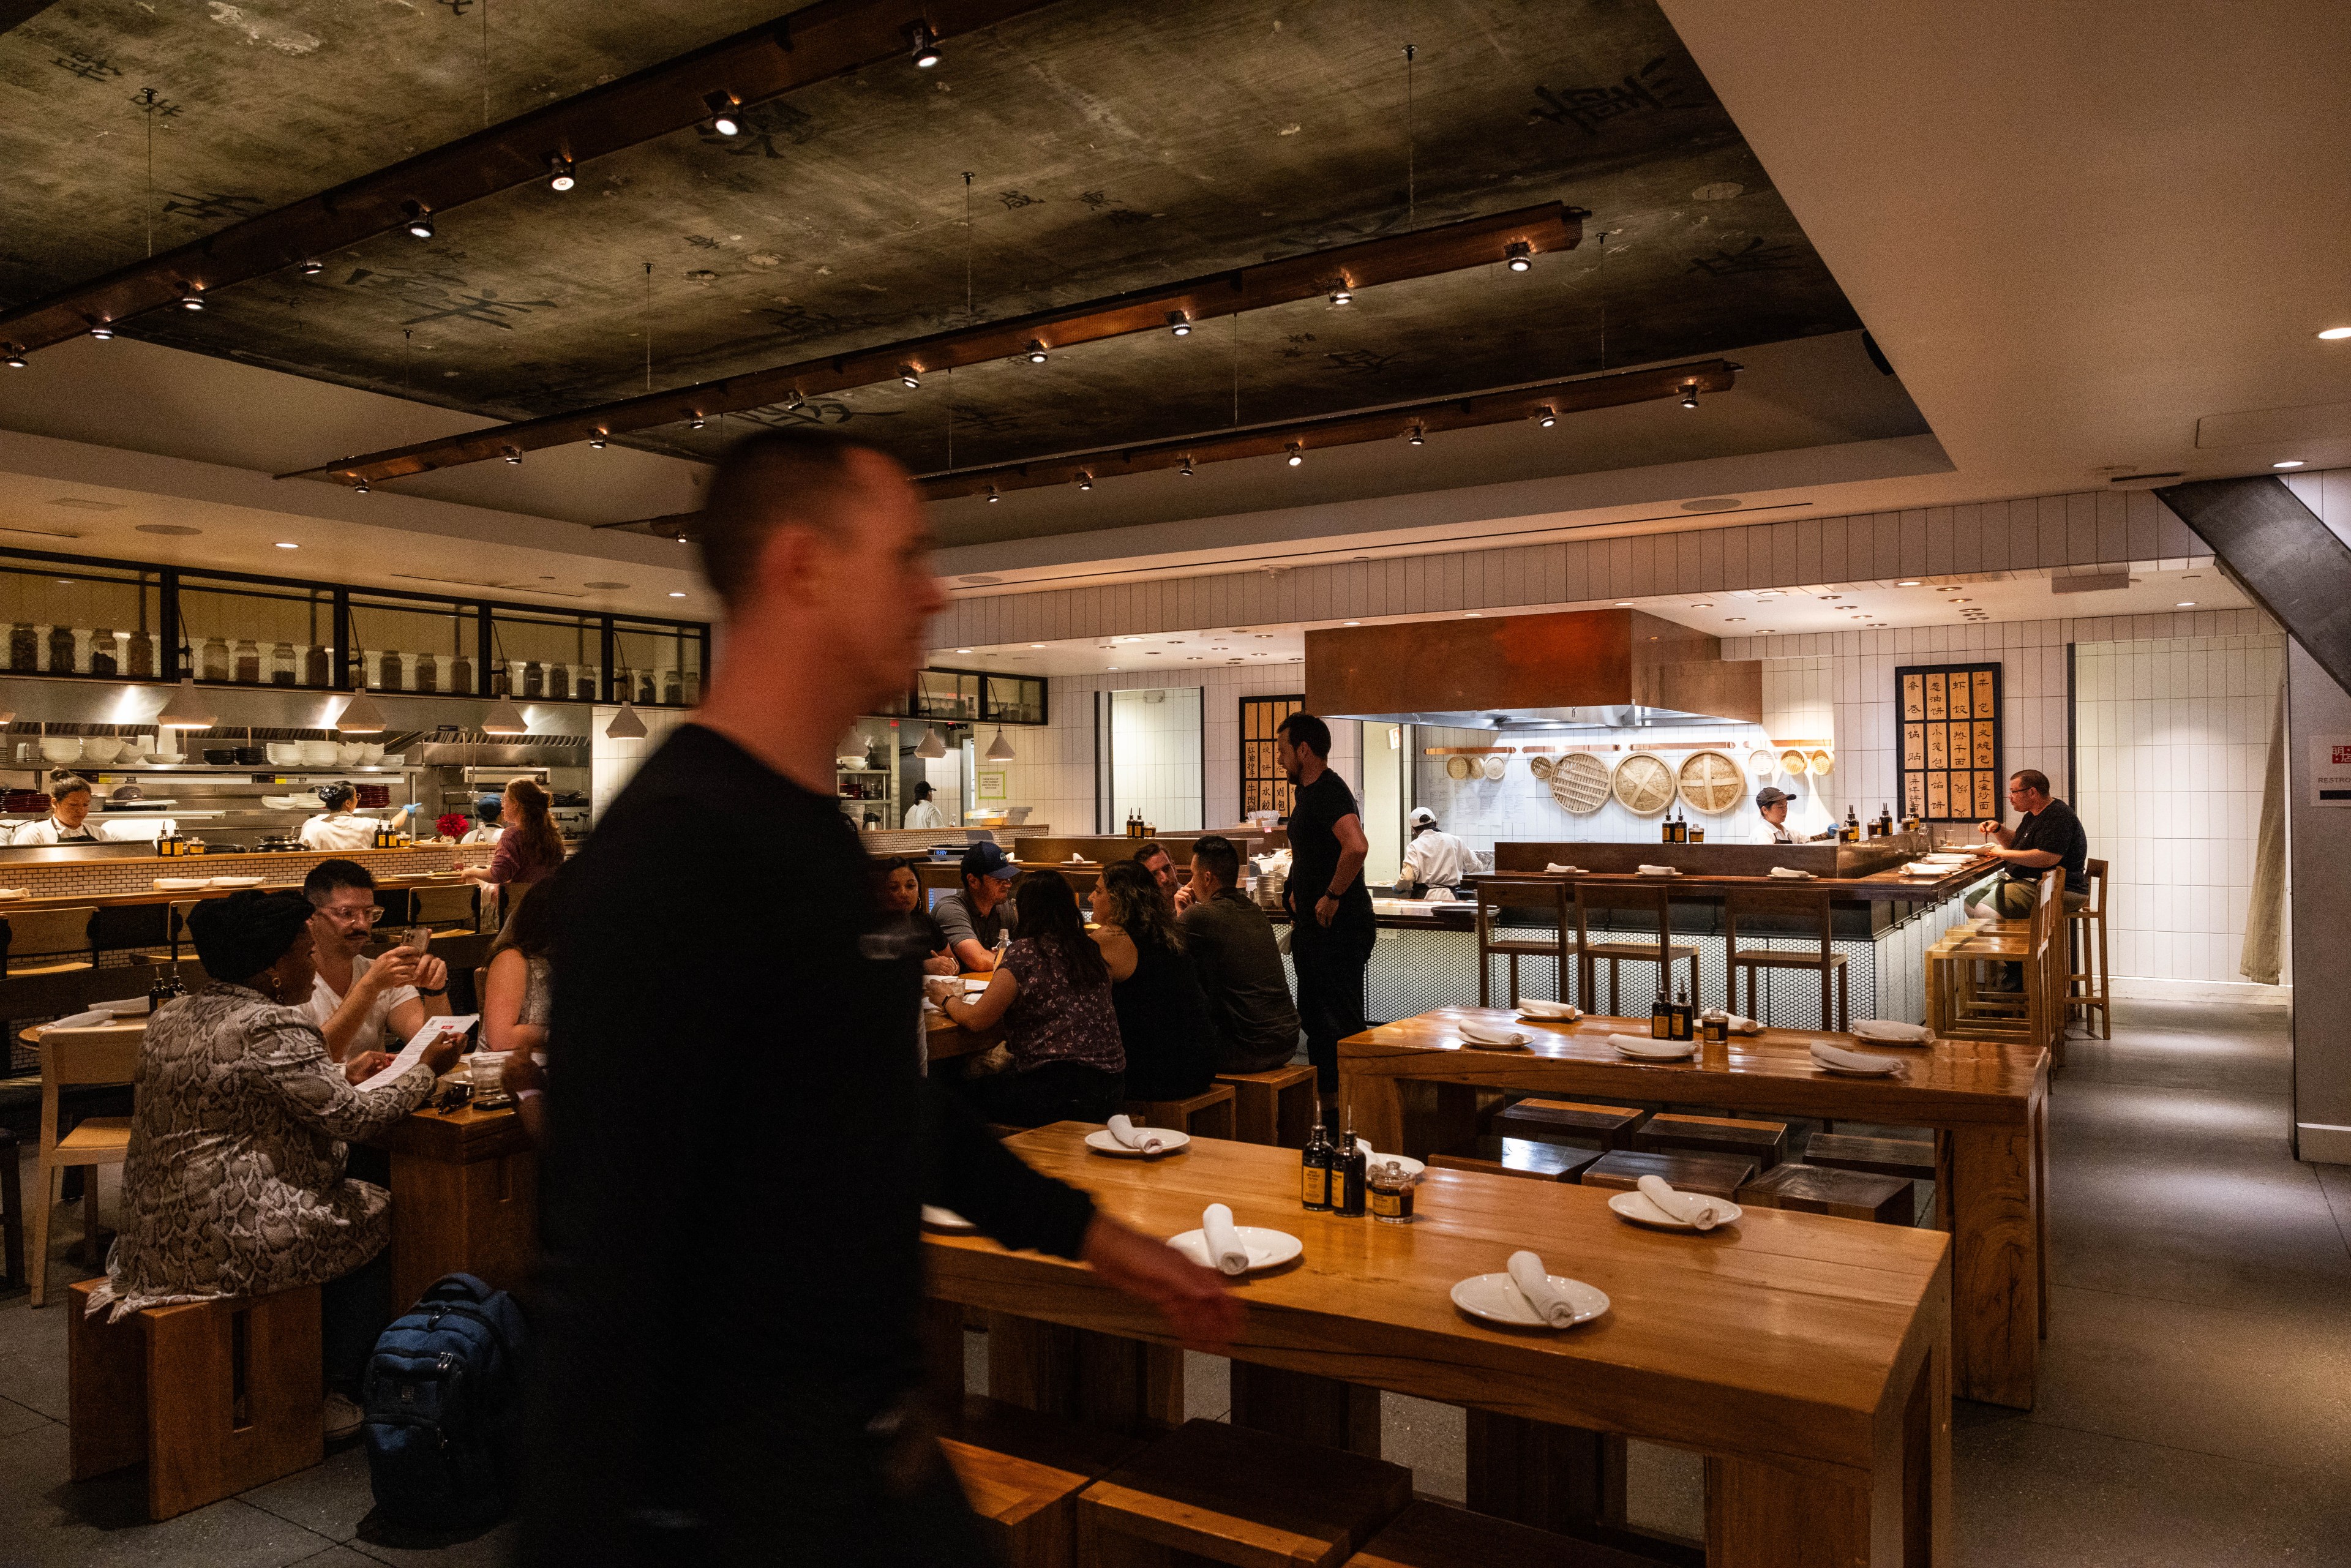 A bustling restaurant interior with patrons dining, an open kitchen, and a blurred figure walking by.